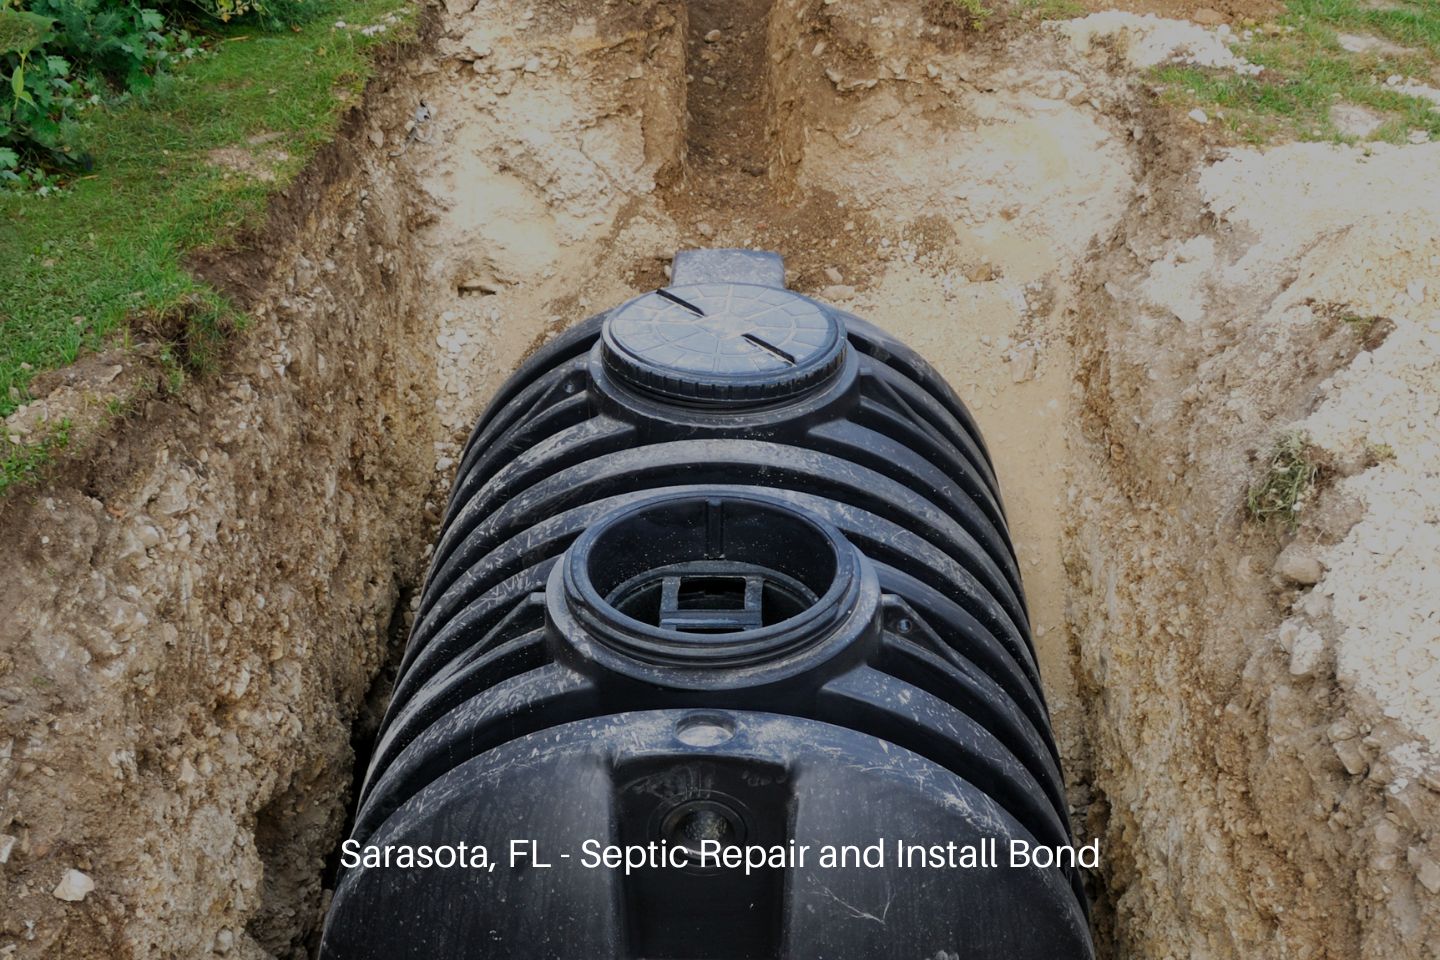 Sarasota, FL - Septic Repair and Install Bond - Installation of a septic tank in a domestic garden.